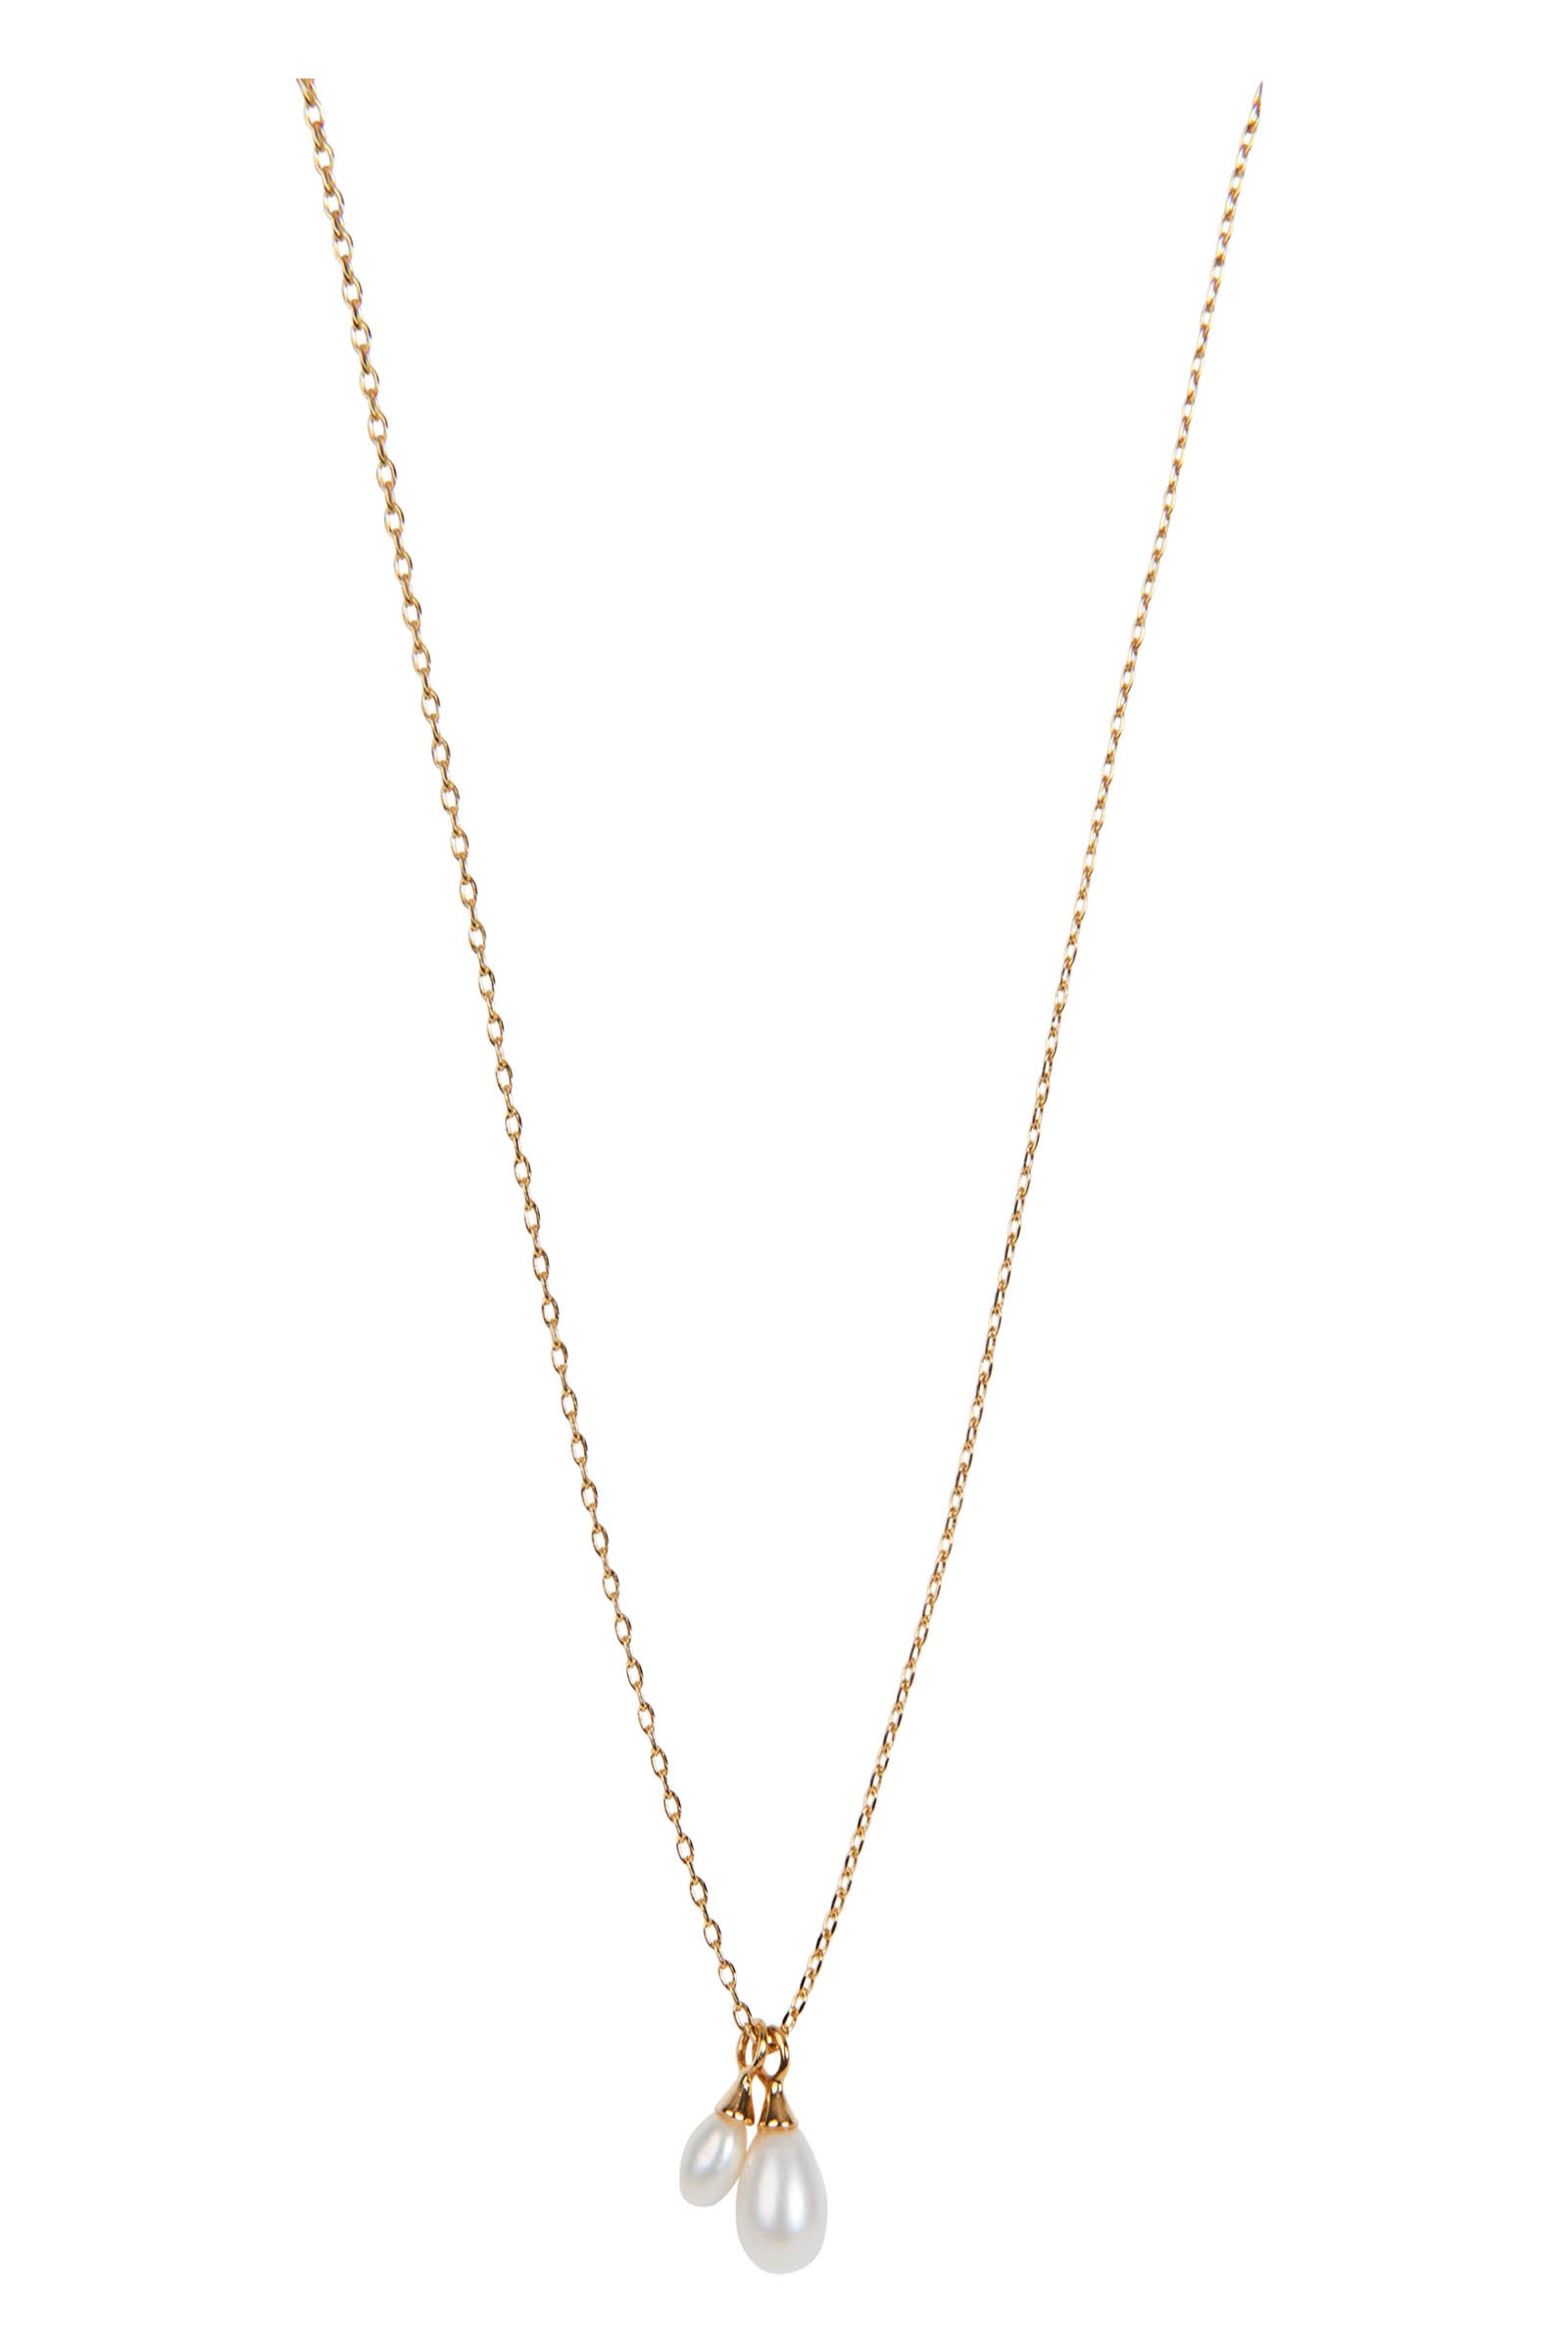 Legacy Necklace - The Pearler - eb&ive Necklace